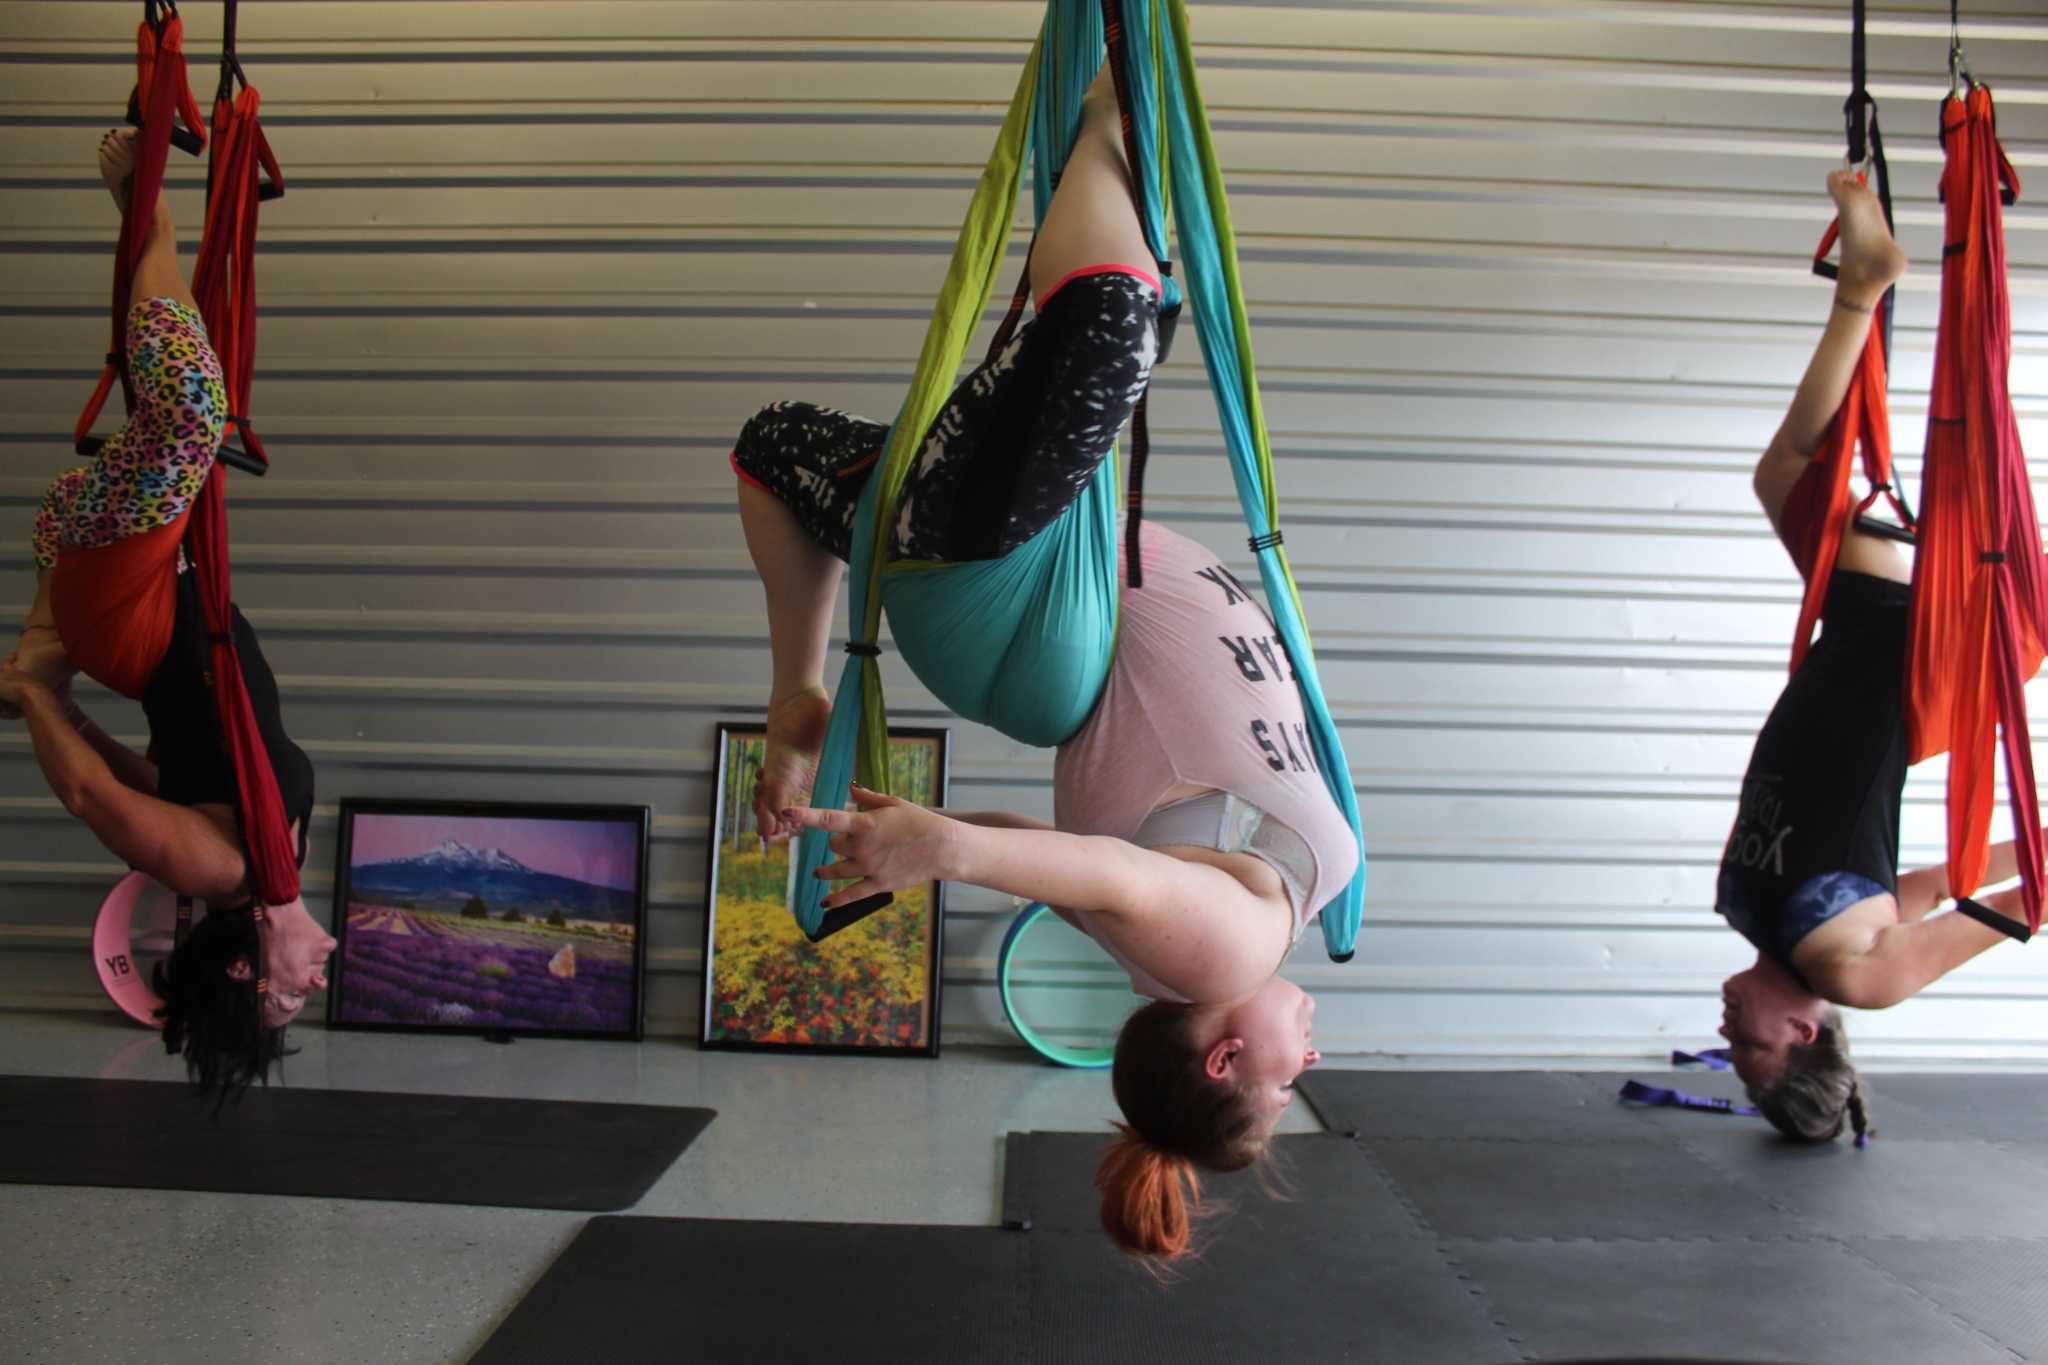 Yoga Trapeze studio in The Woodlands offers upside-down stretching, fun